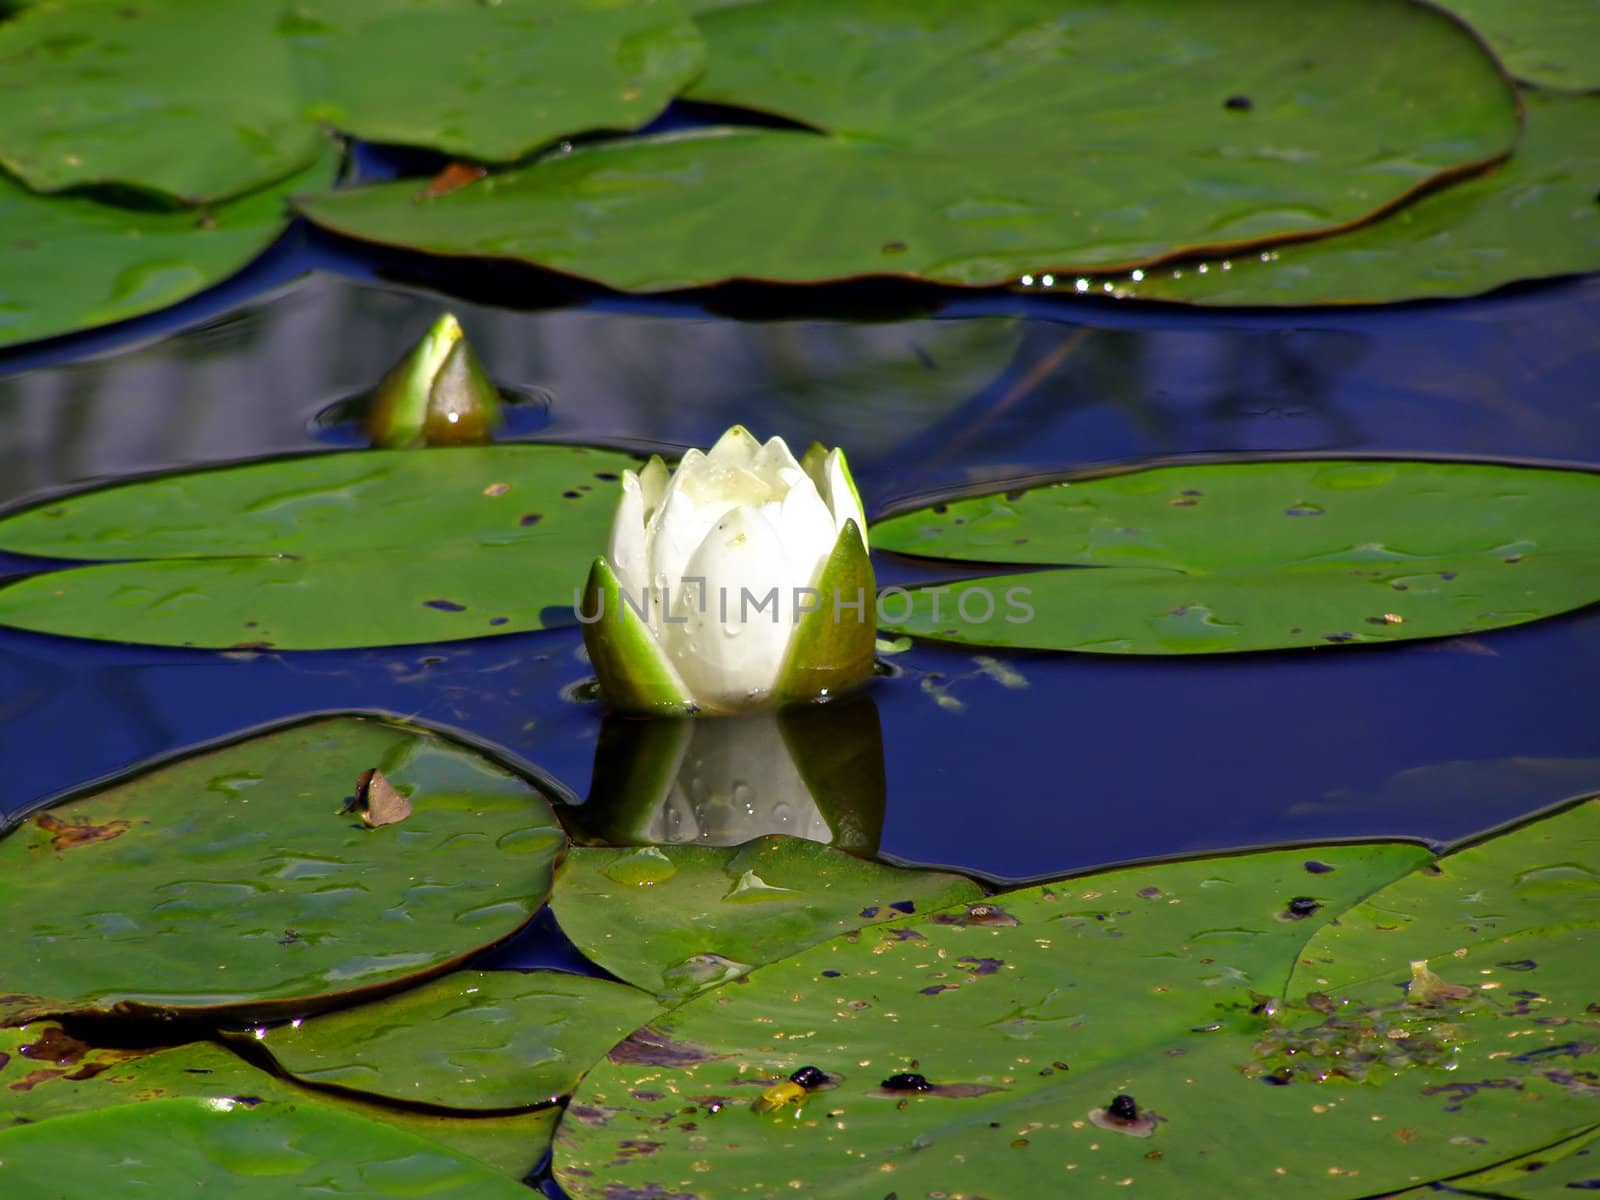 flower of the water lily by basel101658